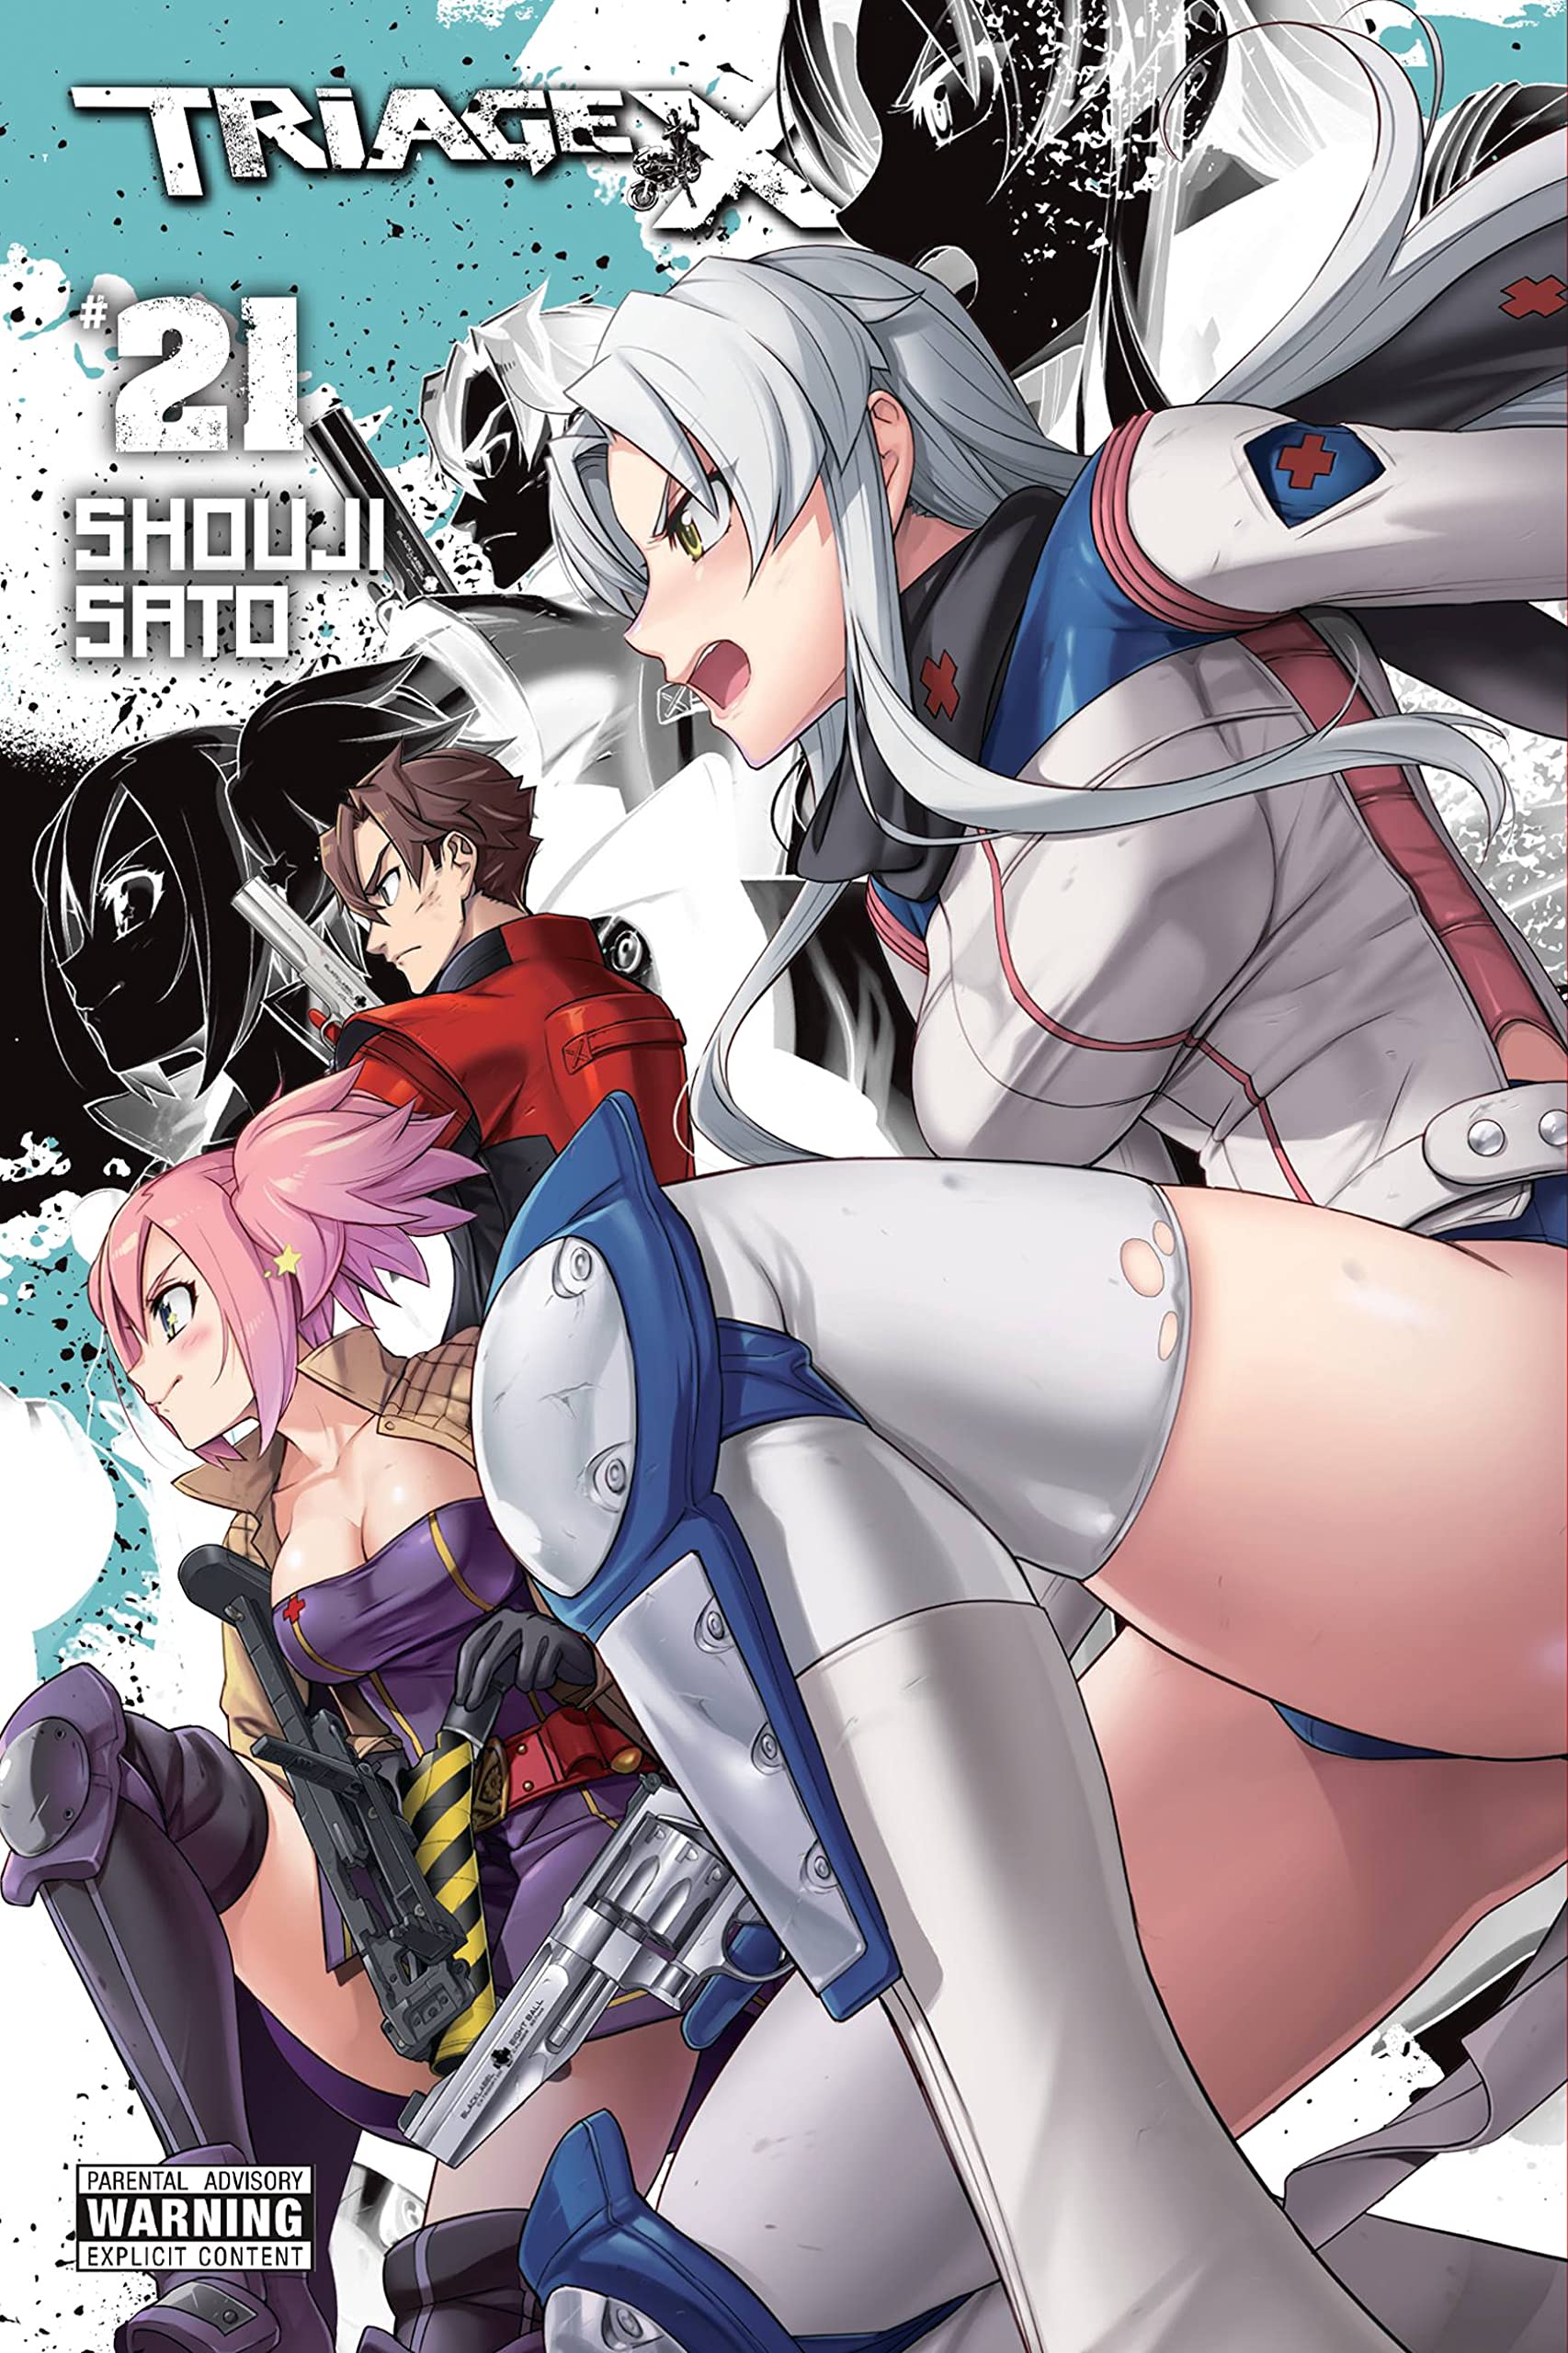 Triage X Volume 21 By Shouji Sato Published By Yen Press Forbiddenplanet Com Uk And Worldwide Cult Entertainment Megastore